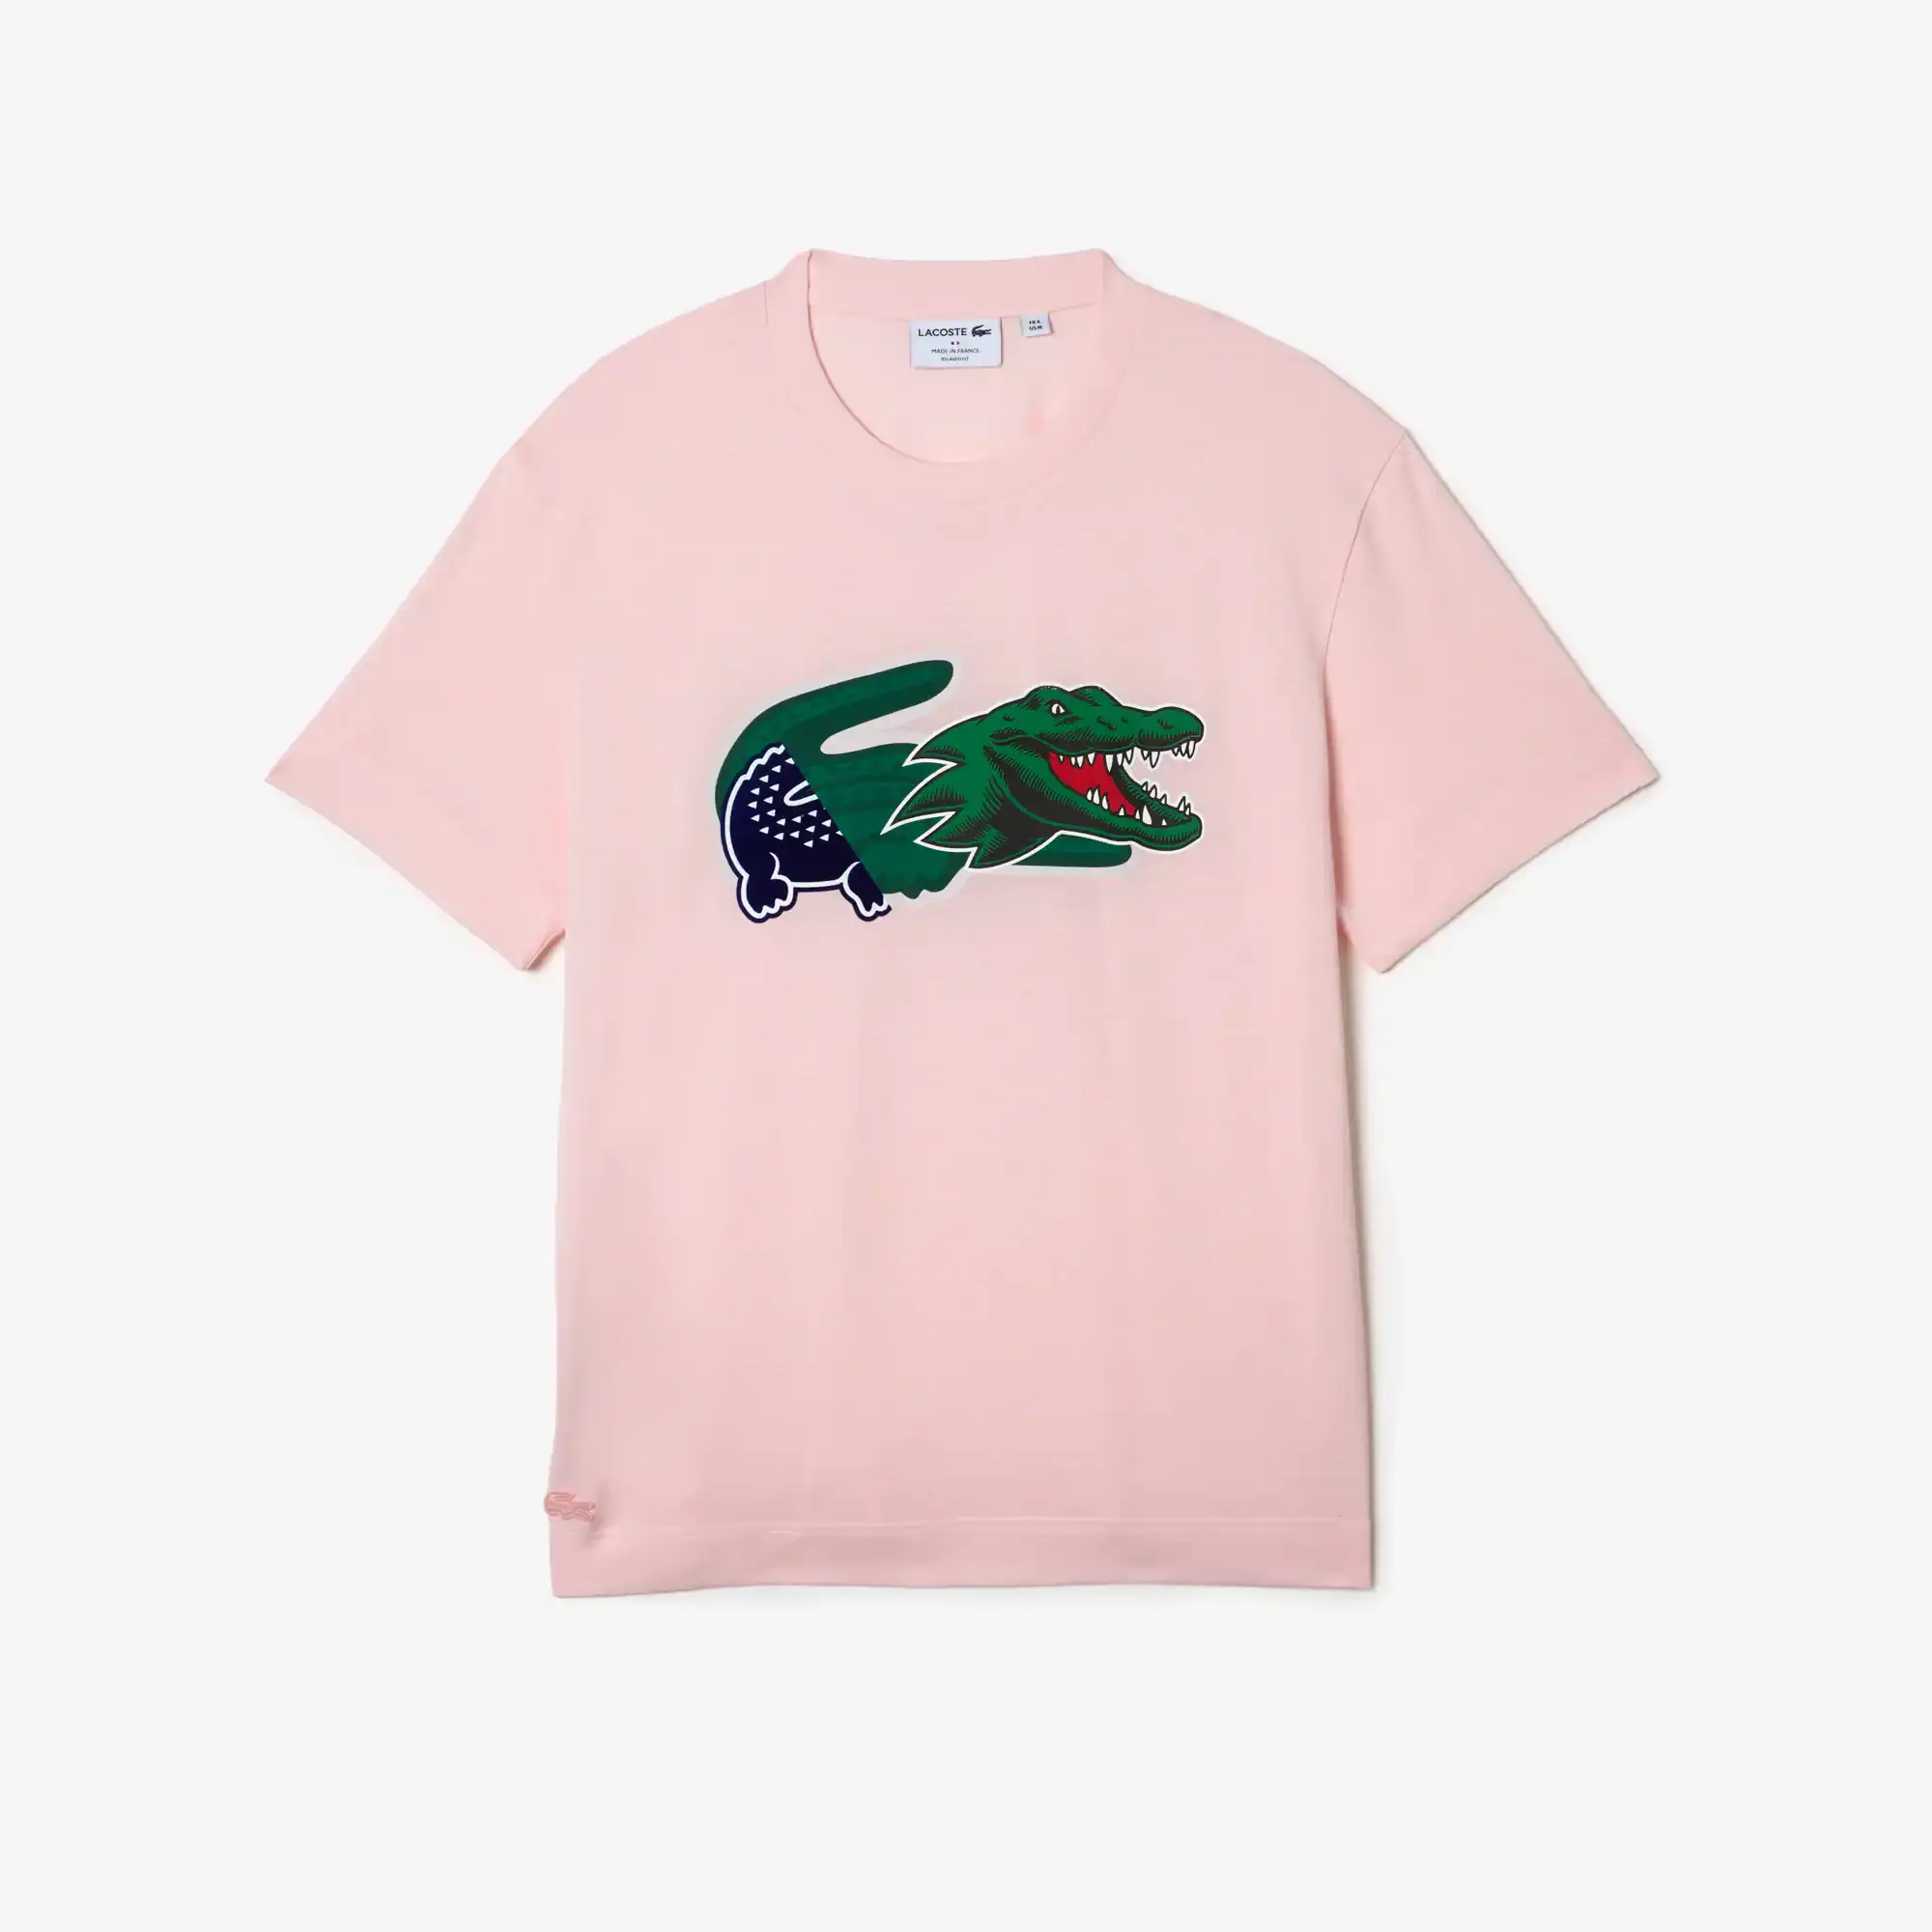 Lacoste Men's Relaxed Fit Oversized Crocodile T-Shirt. 2